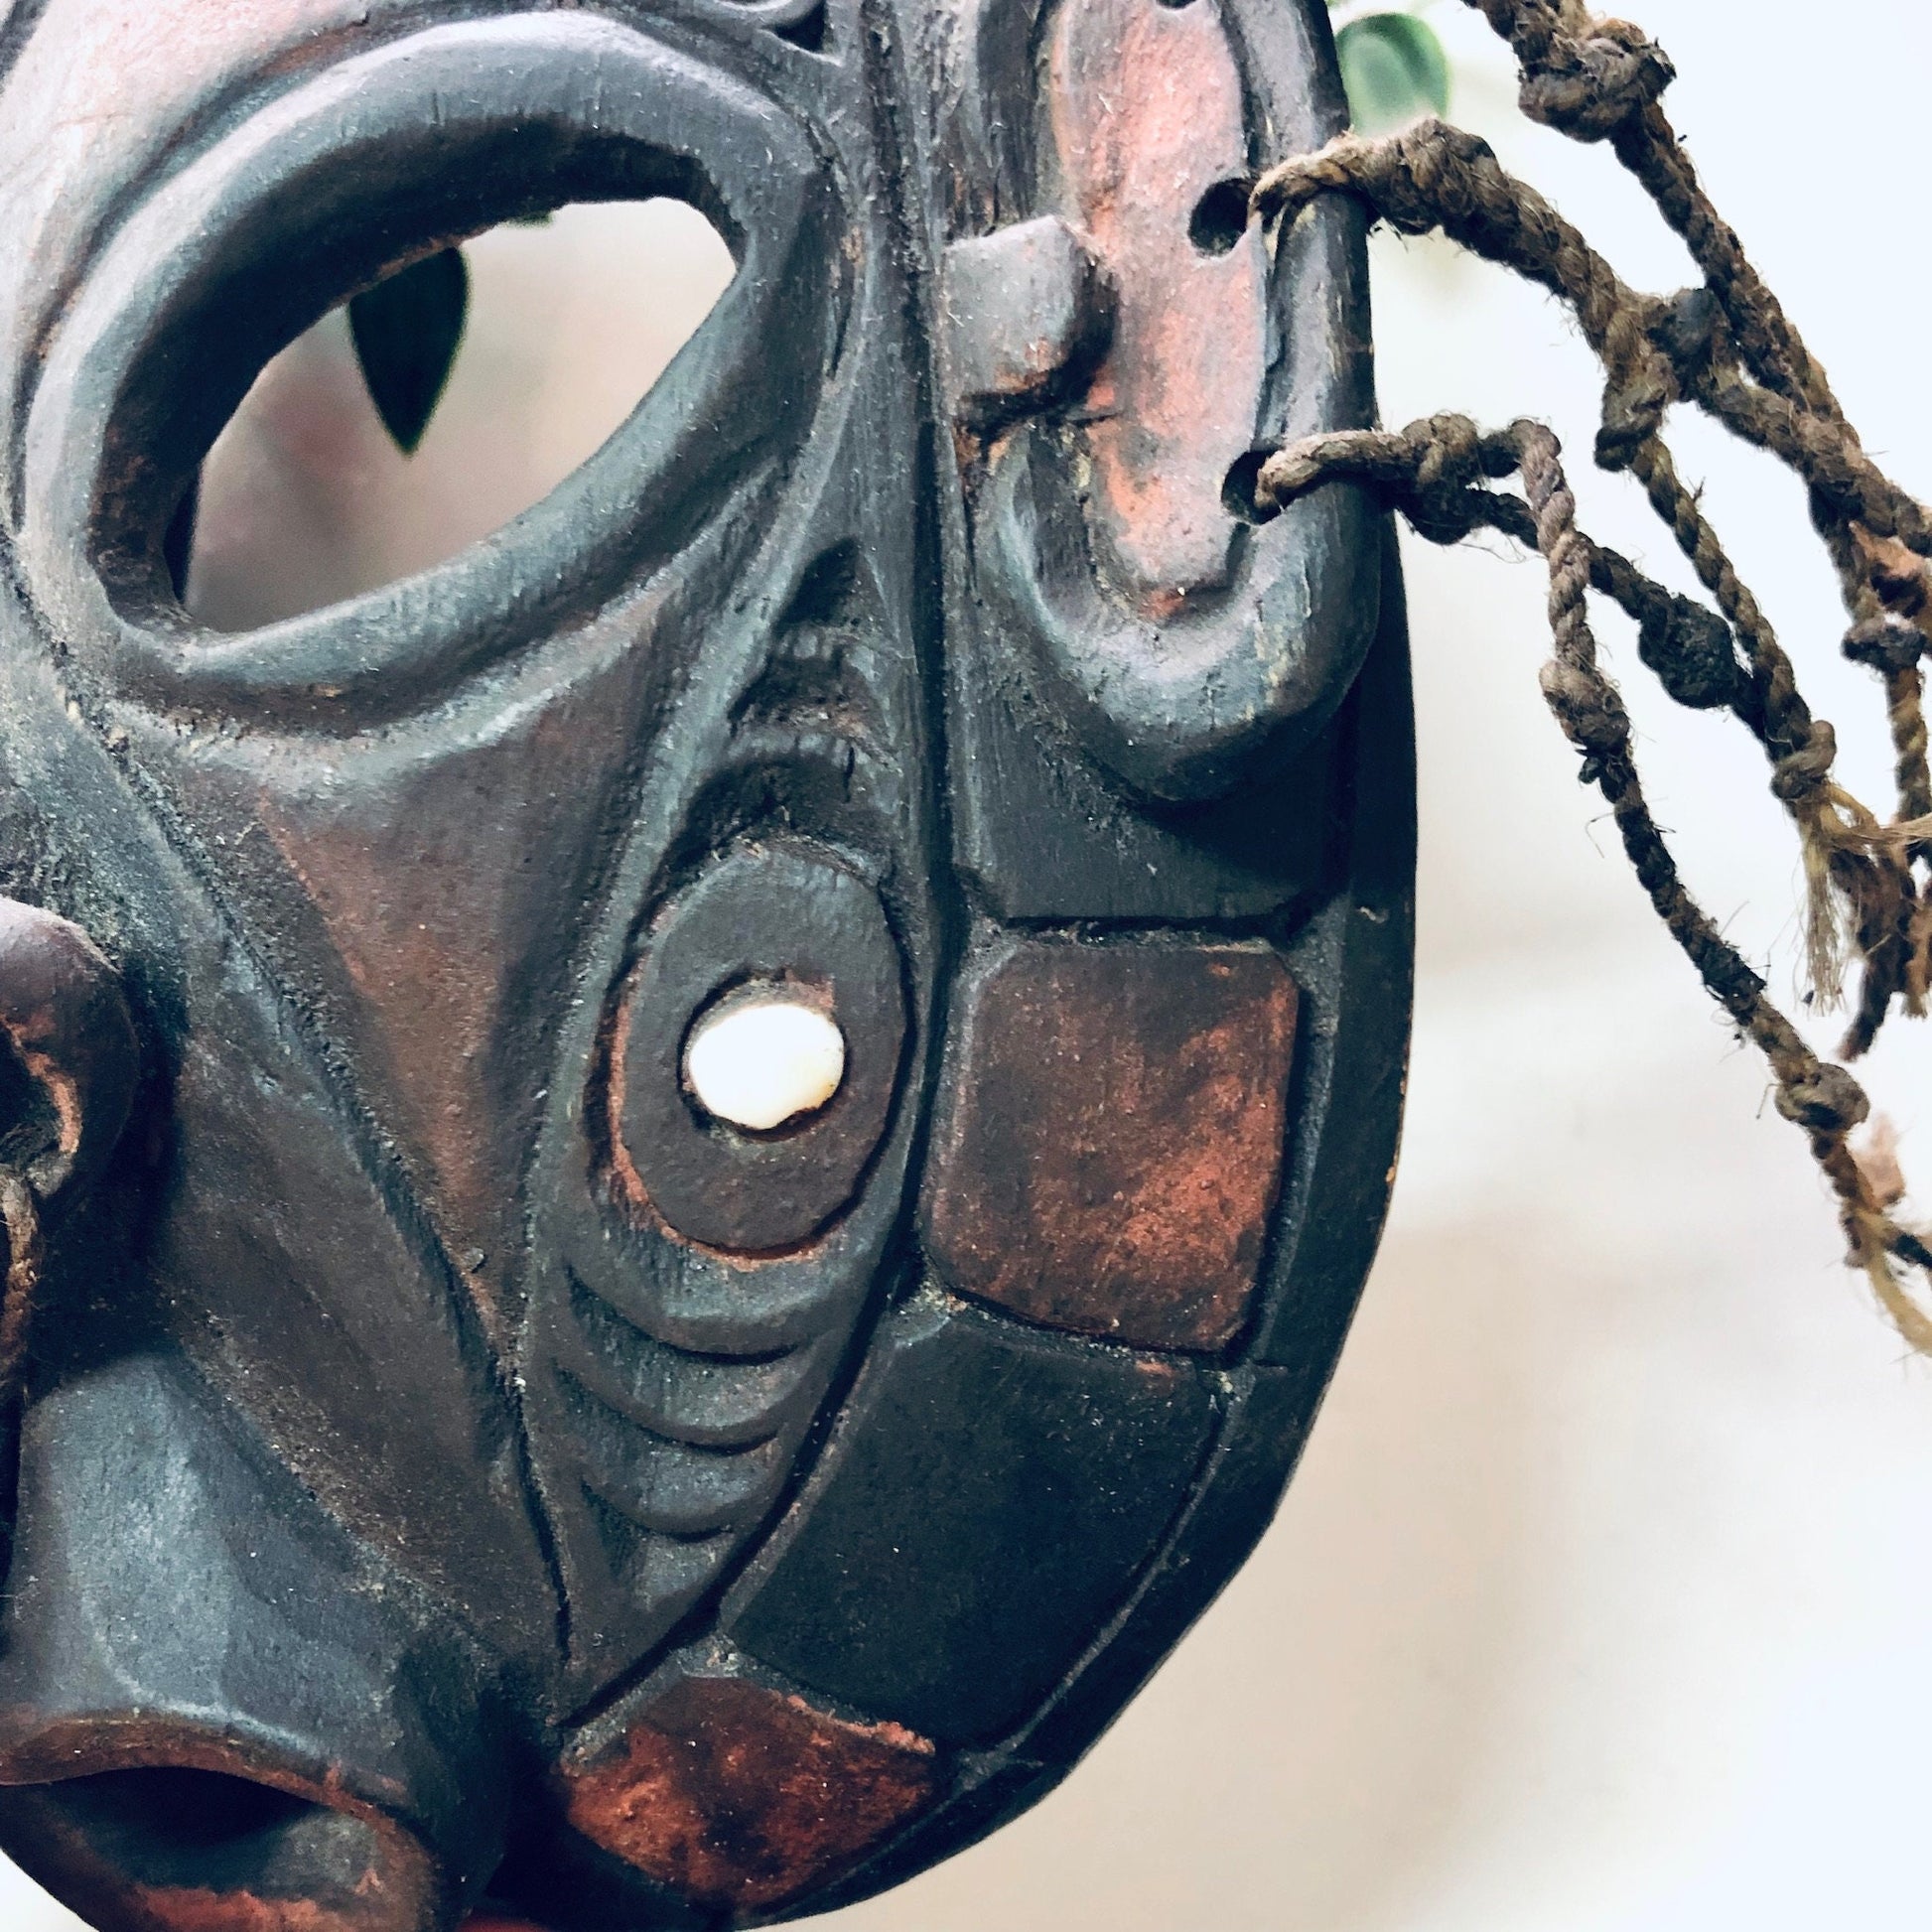 Alt text: Close-up view of a vintage hand-carved wooden mask with intricate detailing, cutout holes, and tribal-inspired design, hanging on a wall as unique home decor or wall art.